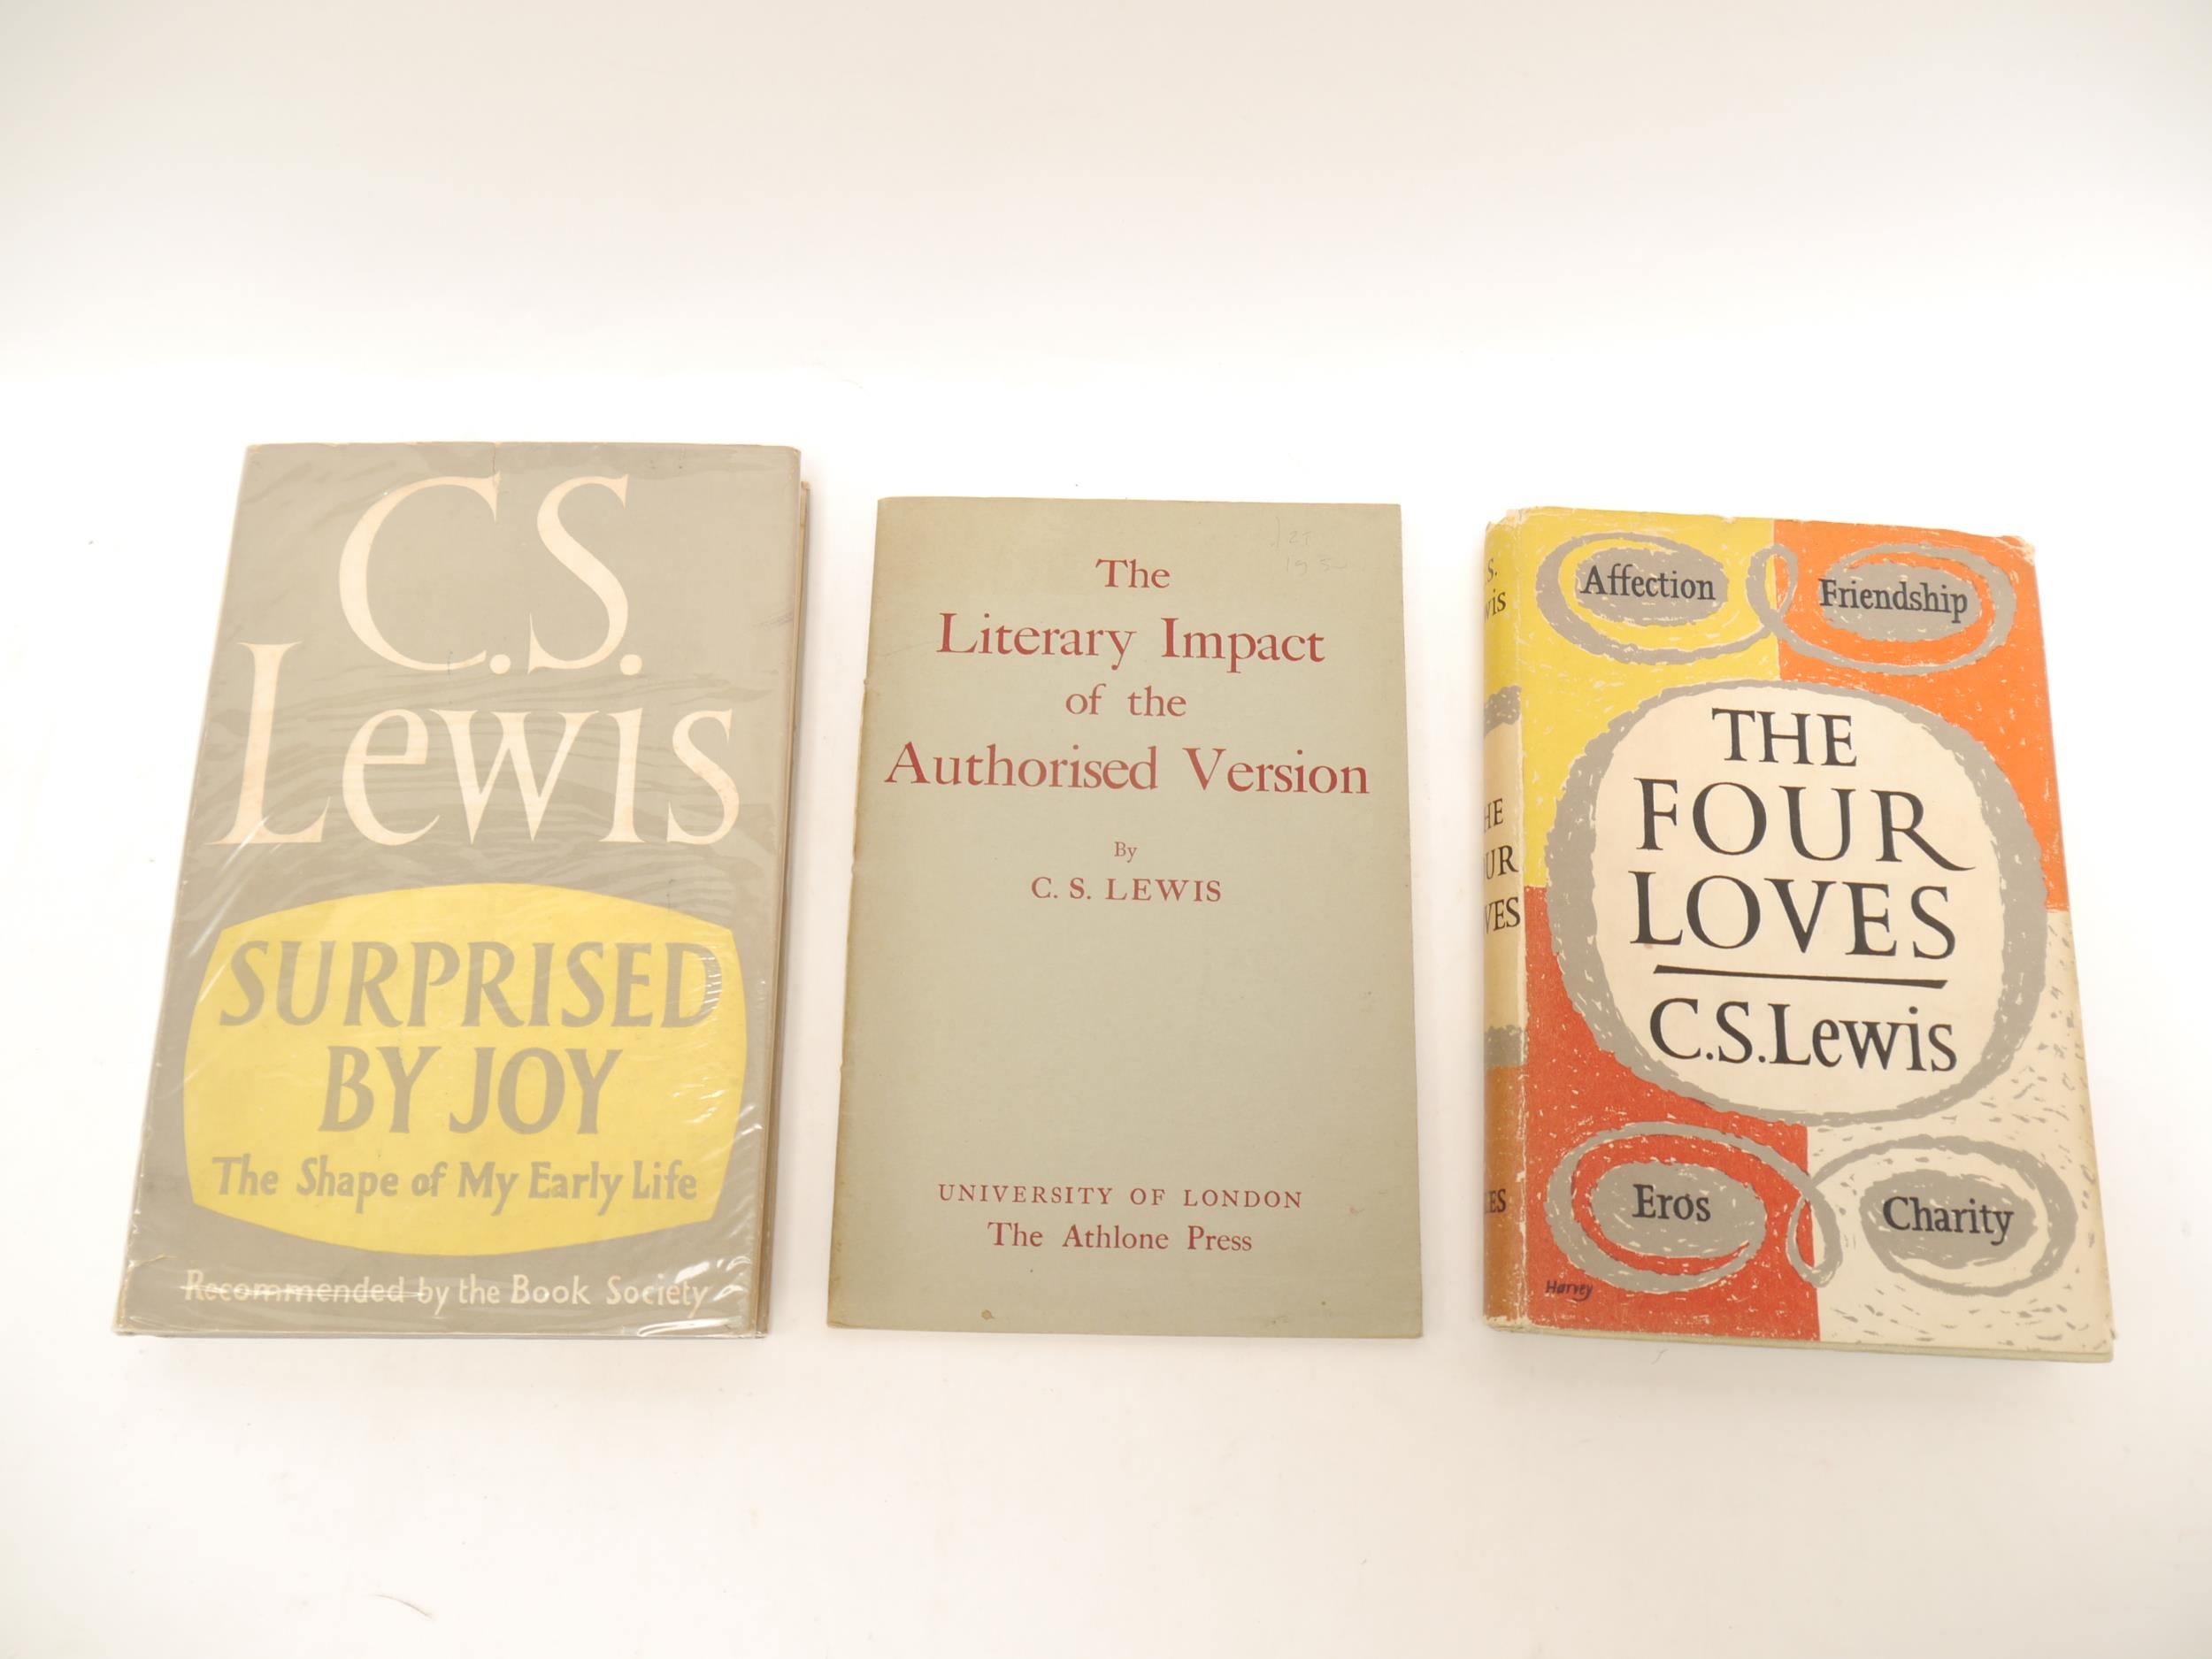 C.S. Lewis, 3 titles: 'The Literary Impact of the Authorised Version', University of London, The